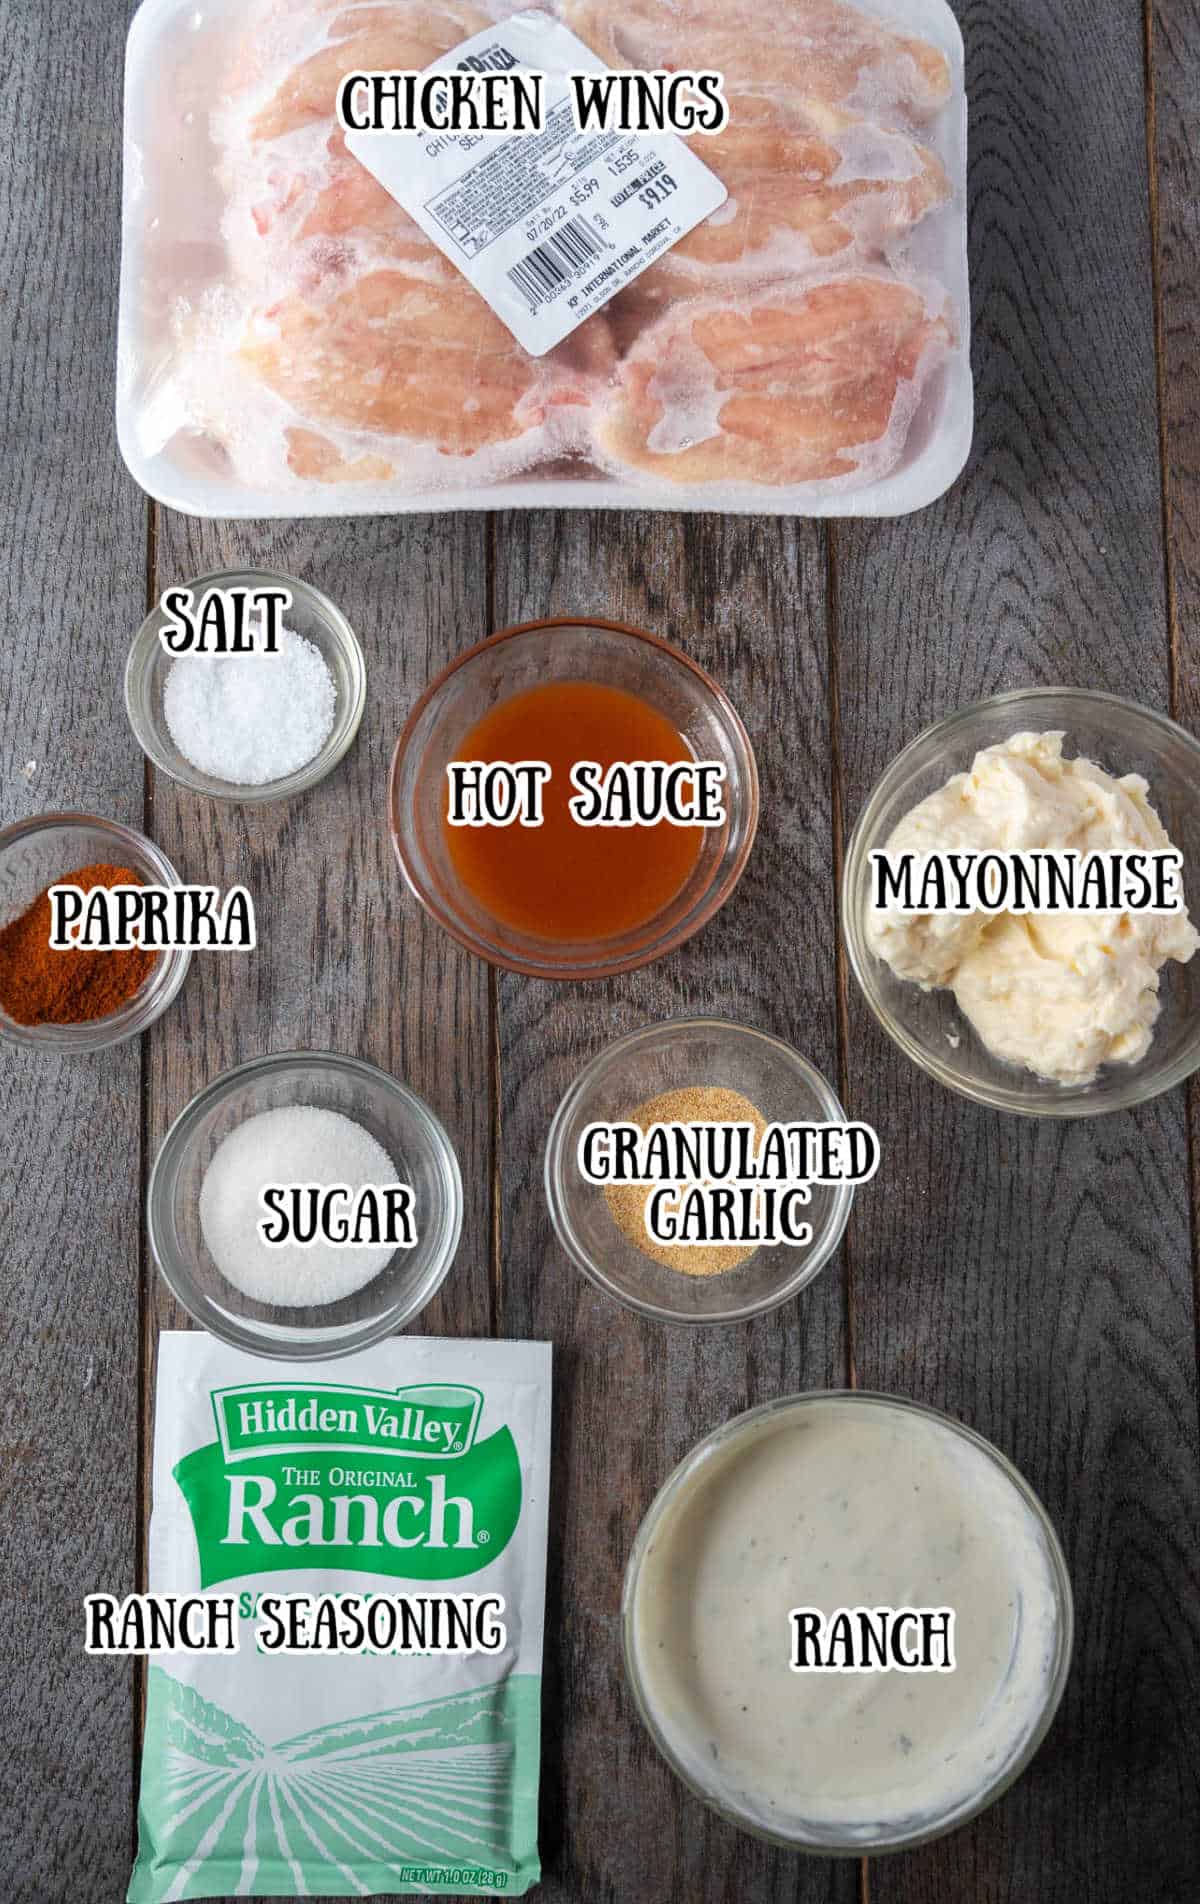 All the ingredients needed for this recipe.